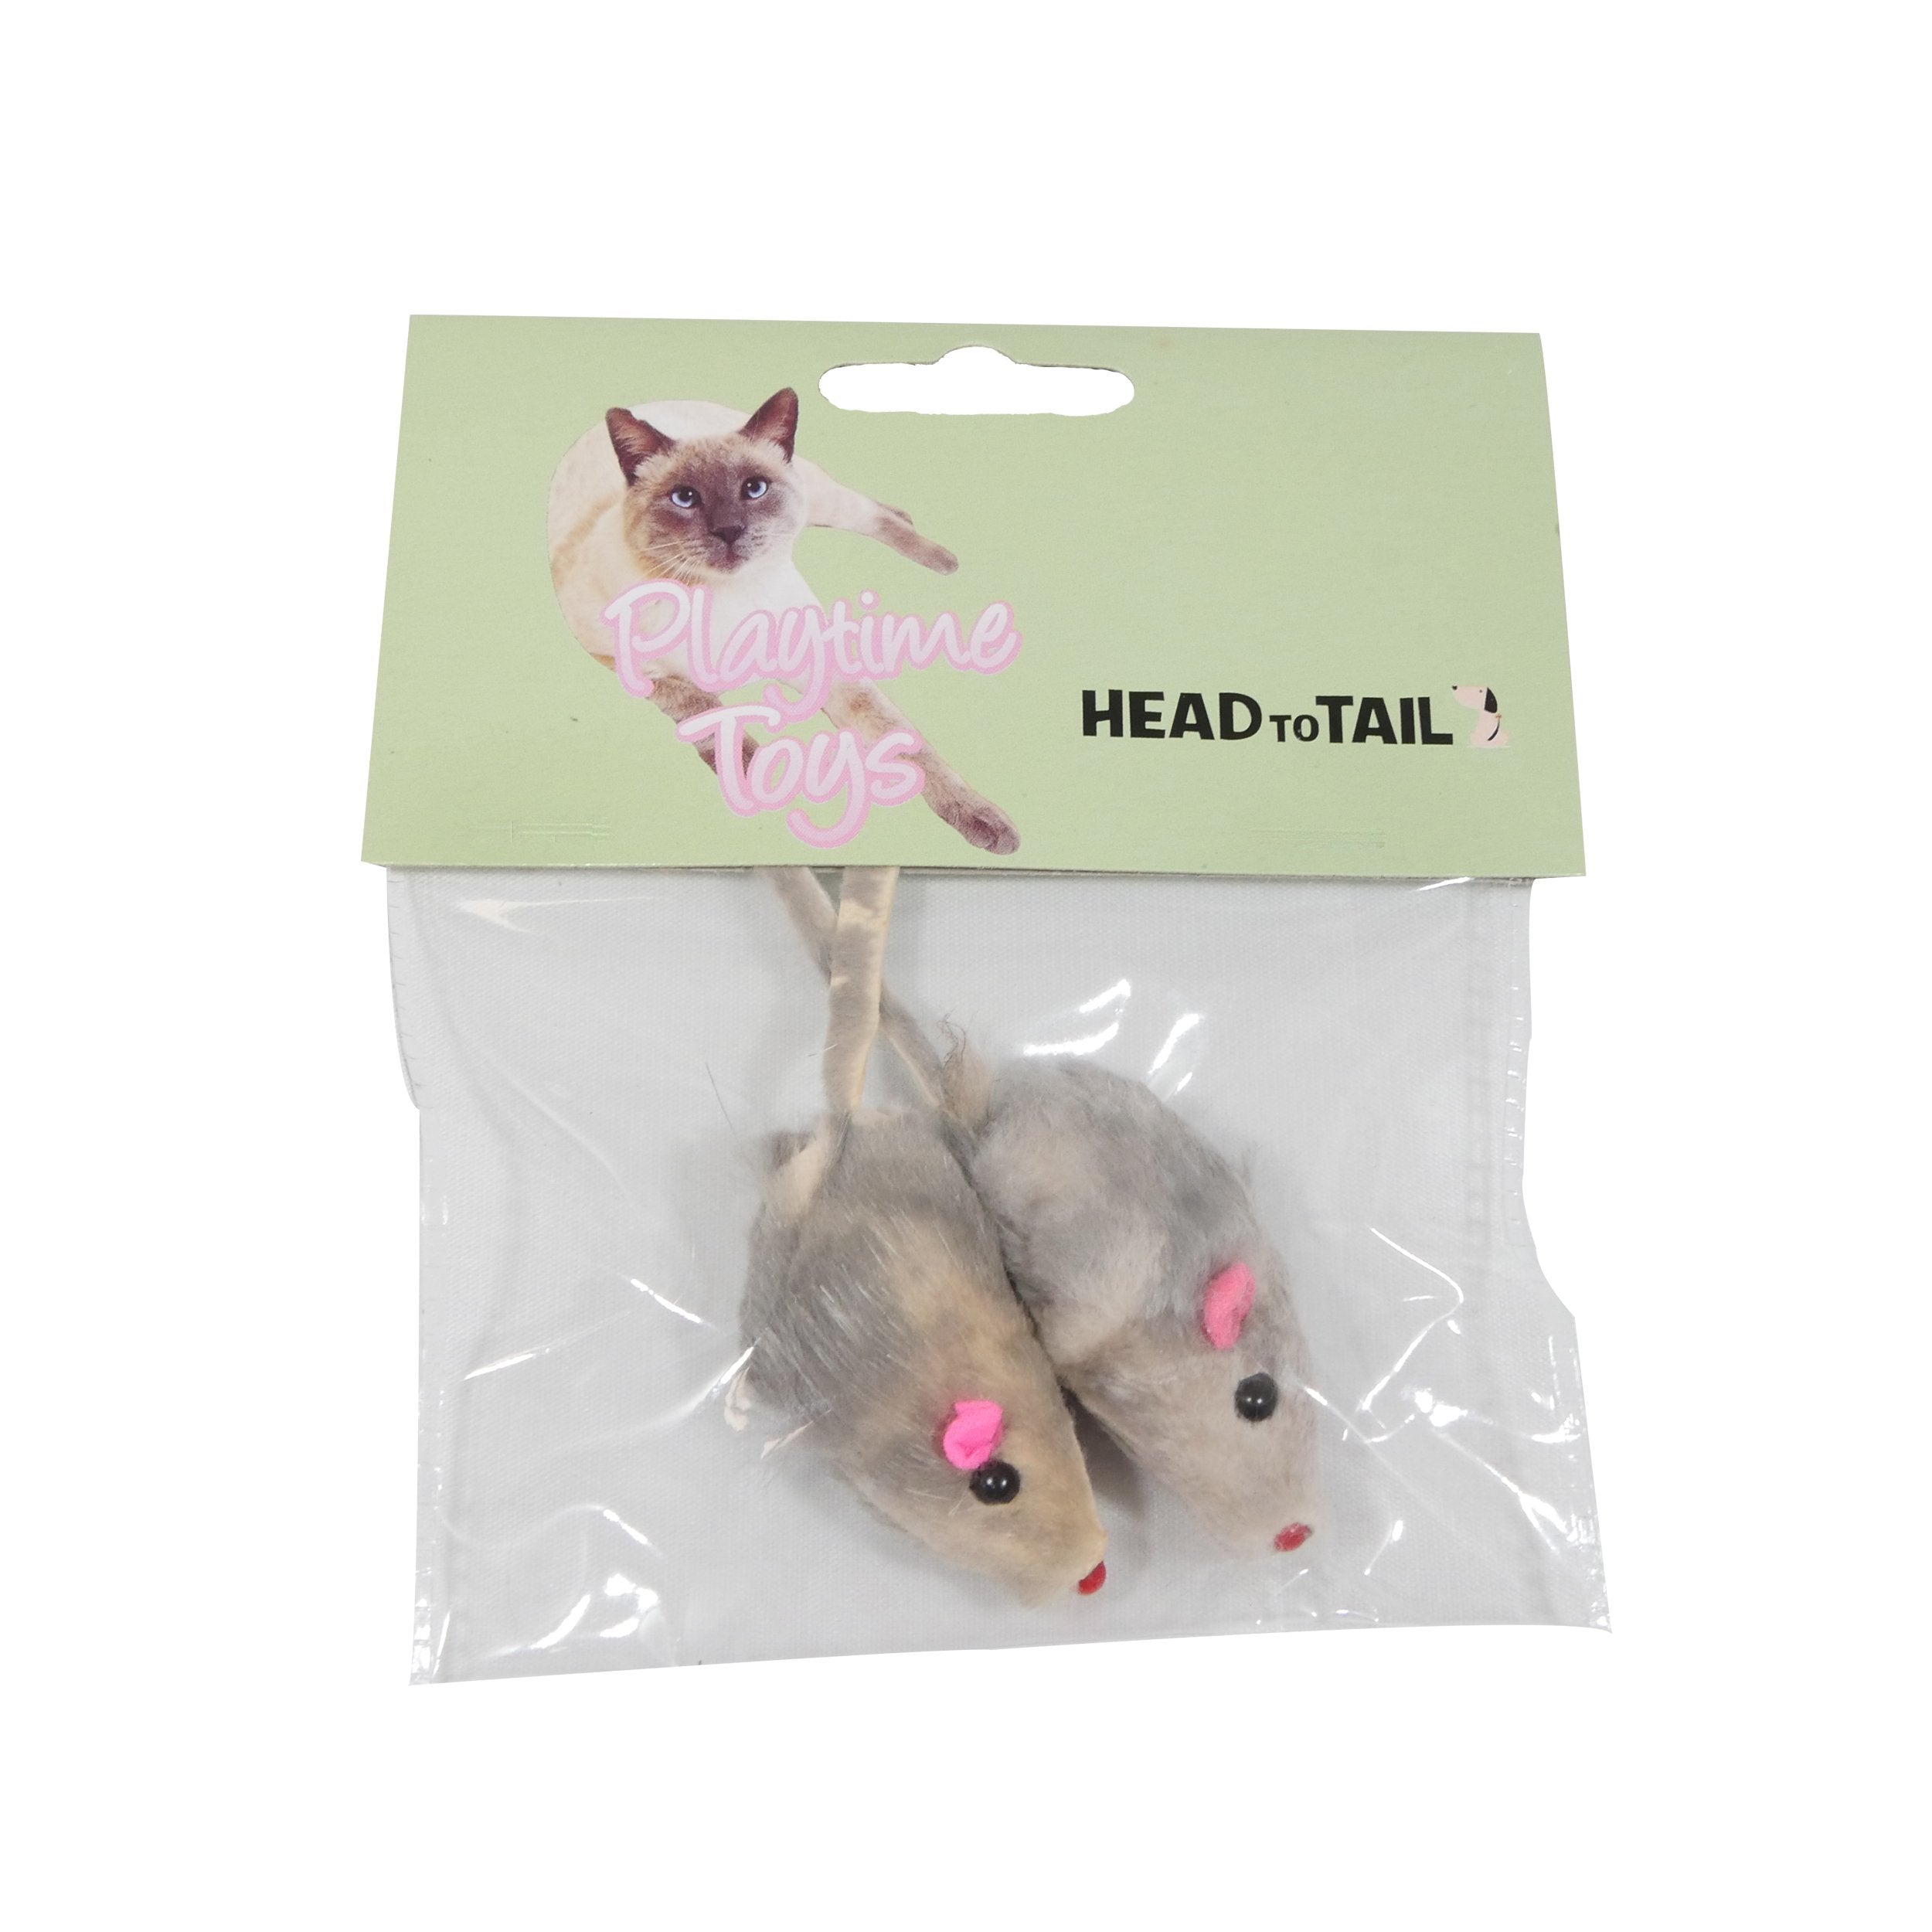 2-Piece Grey Mice Cat Toy Stuffed With Cotton [Buy 1 Get 1 Free]